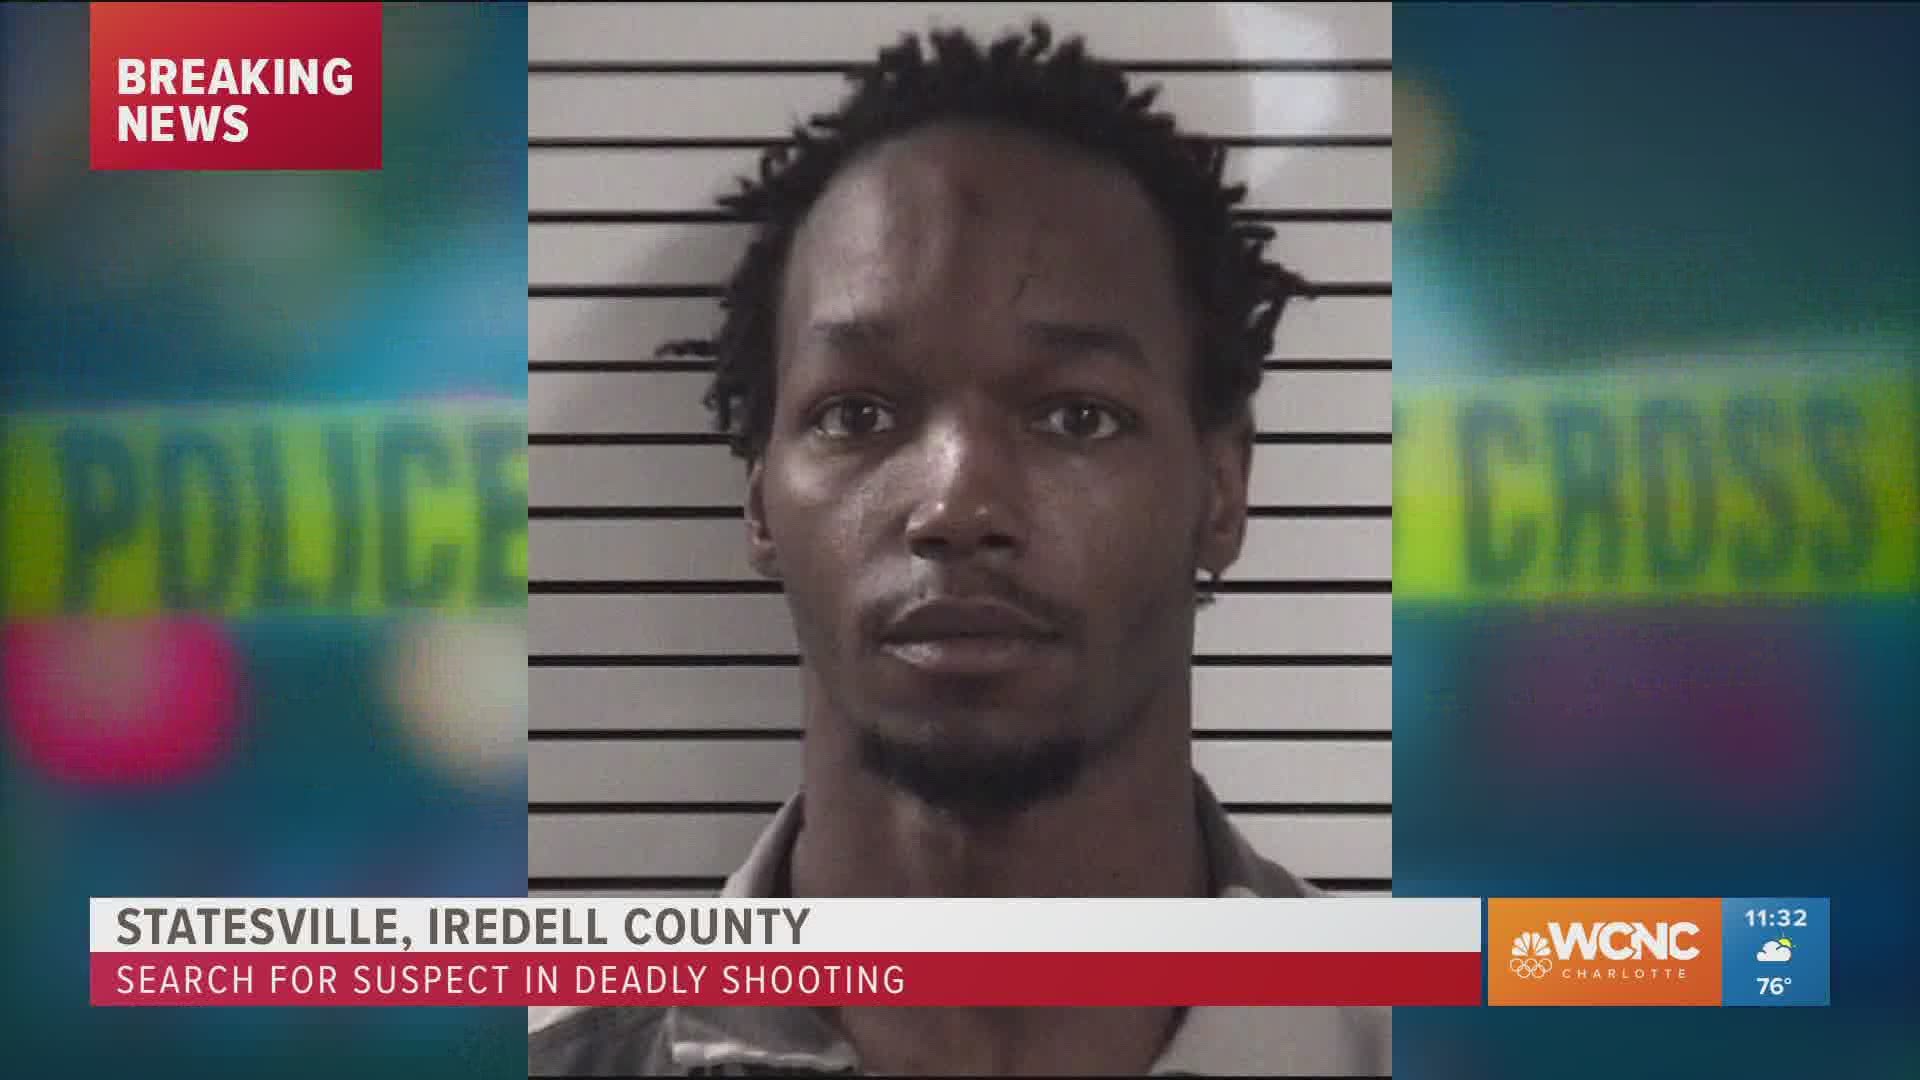 Police in Iredell County are searching for a man wanted in connection with a deadly shooting in Statesville Tuesday morning.